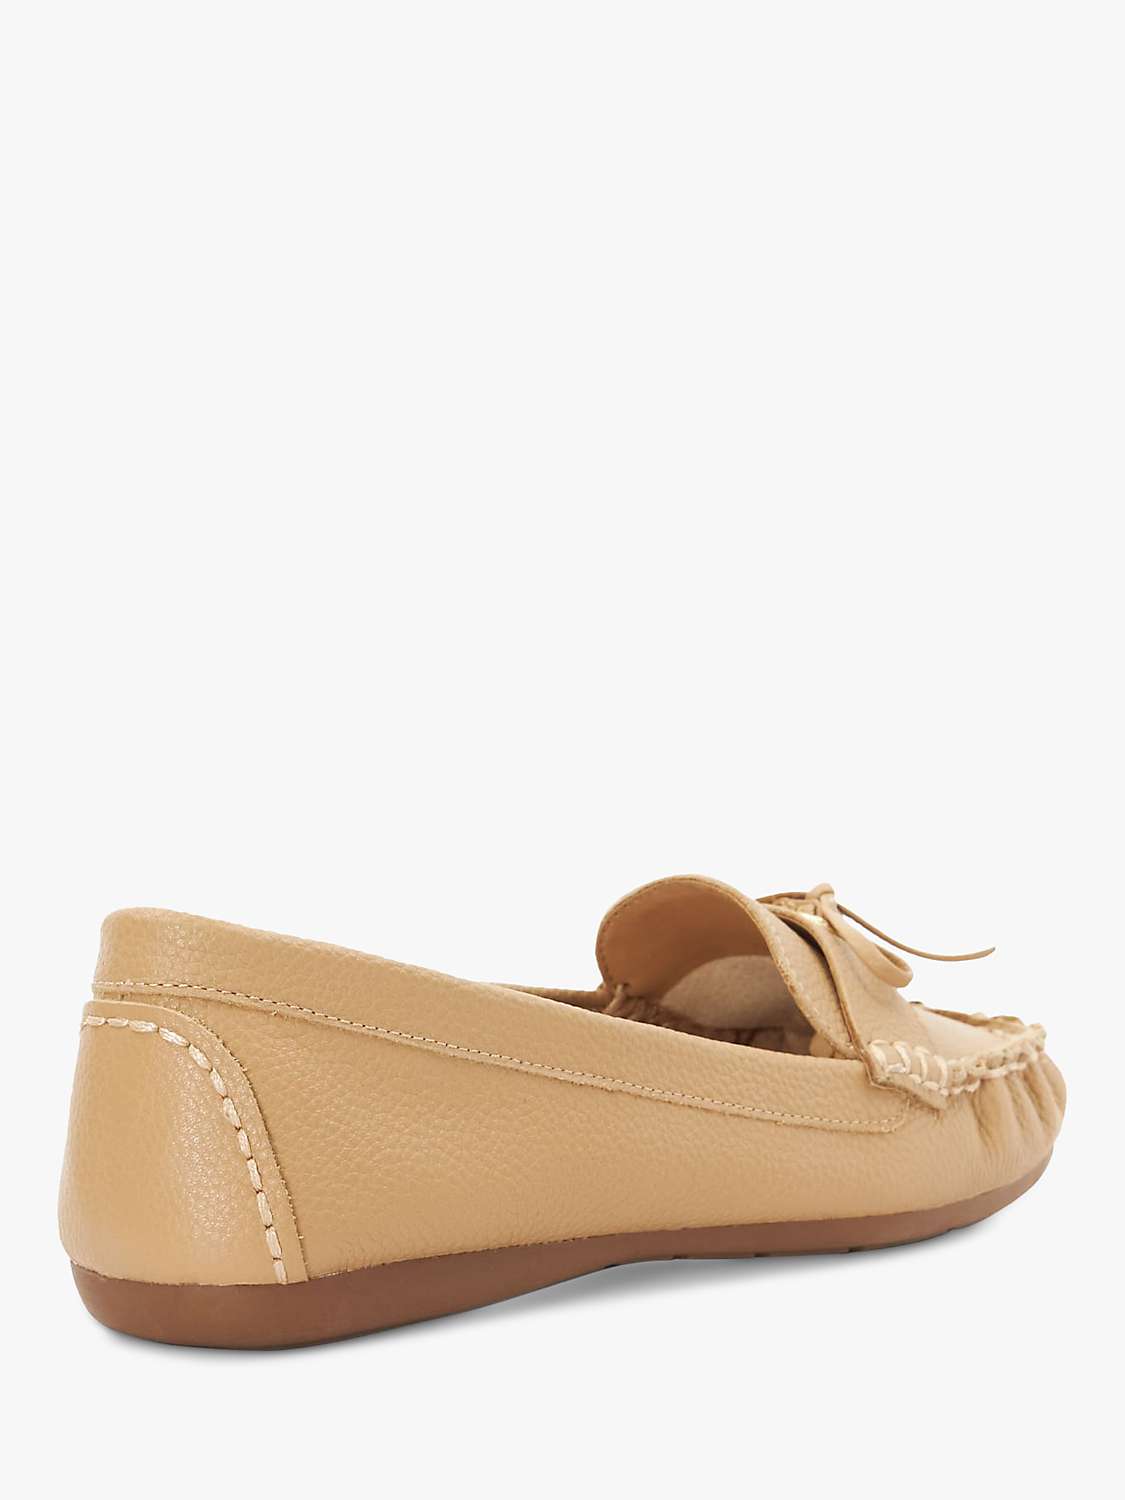 Buy Dune Grovers Leather Bow Detail Driving Loafers Online at johnlewis.com